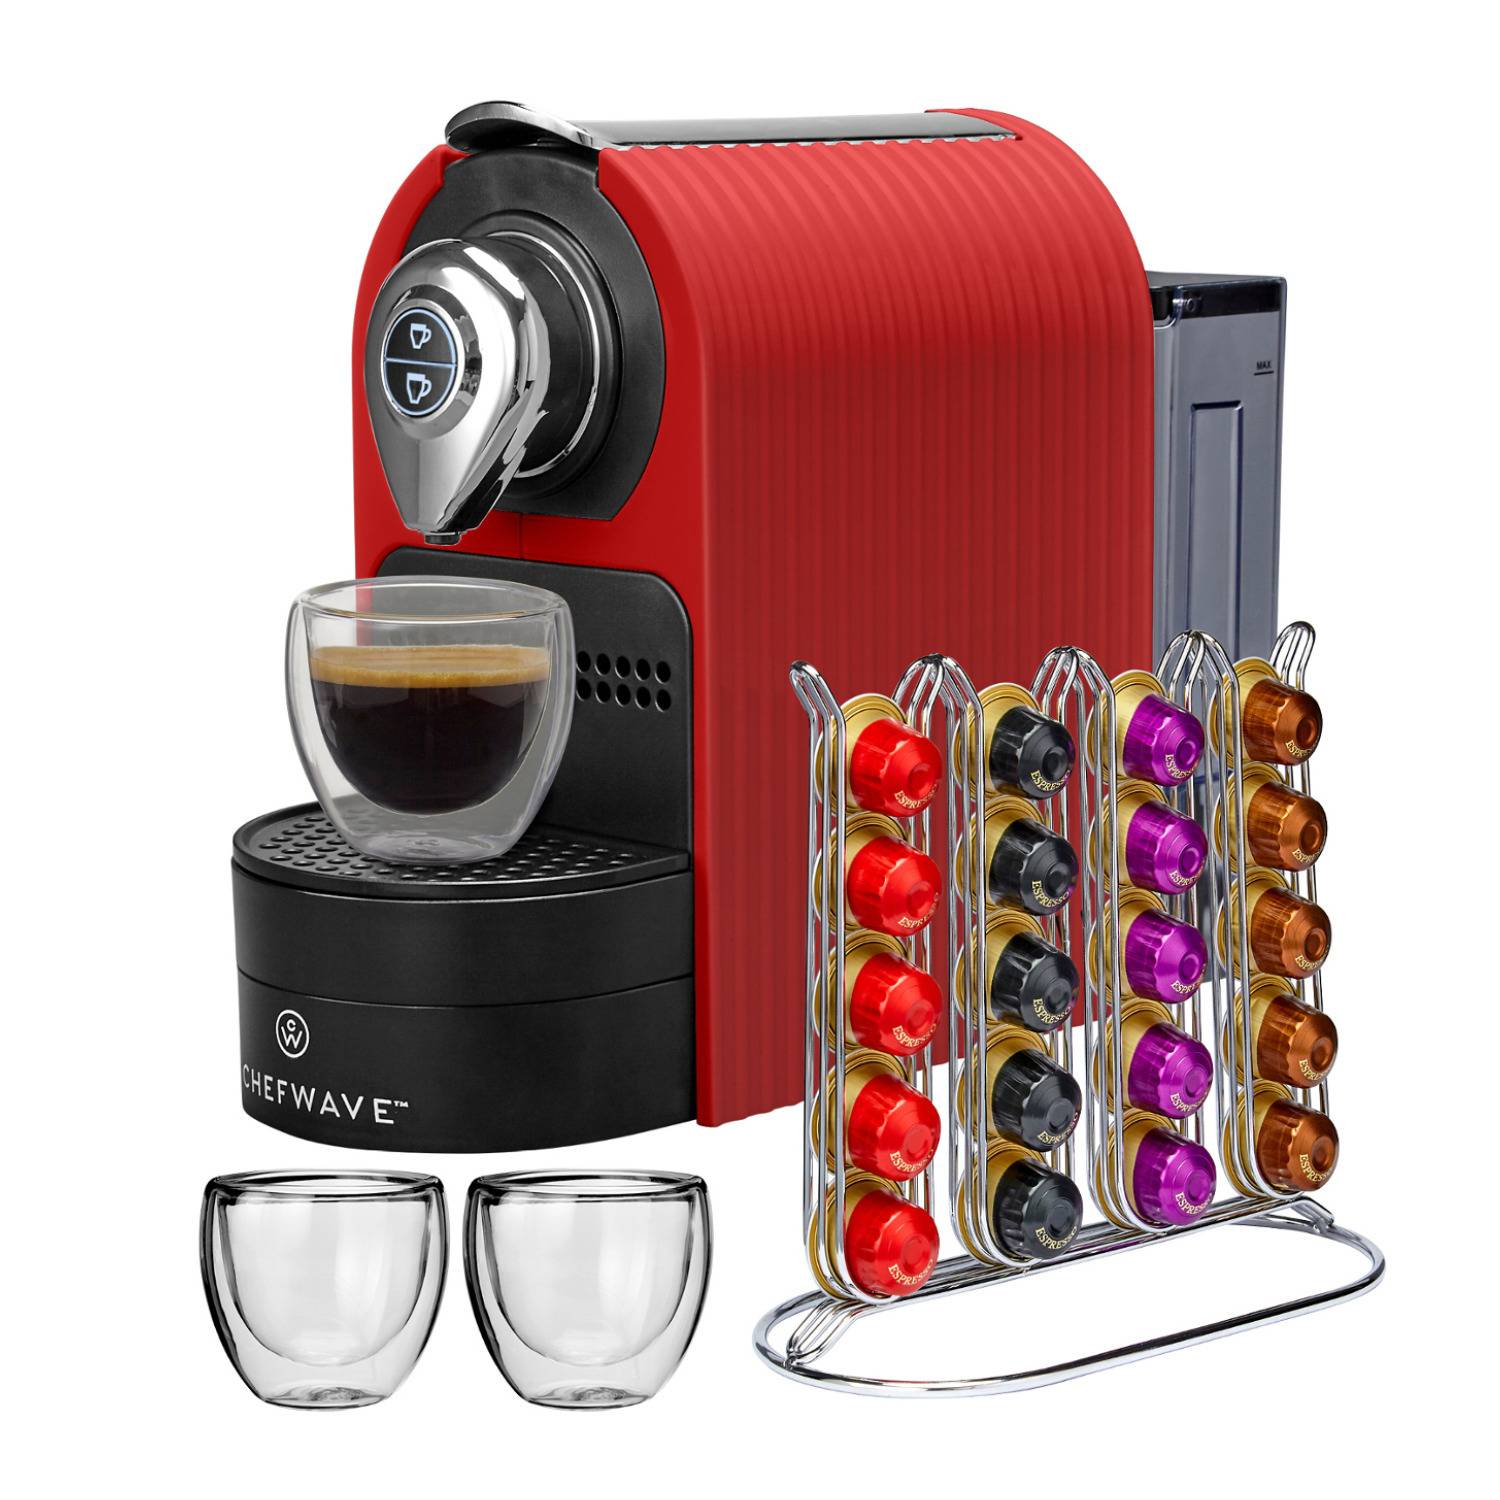 ChefWave Mini Espresso Machine for Nespresso Compatible Capsules (Red) with Capsule Holder and Cups